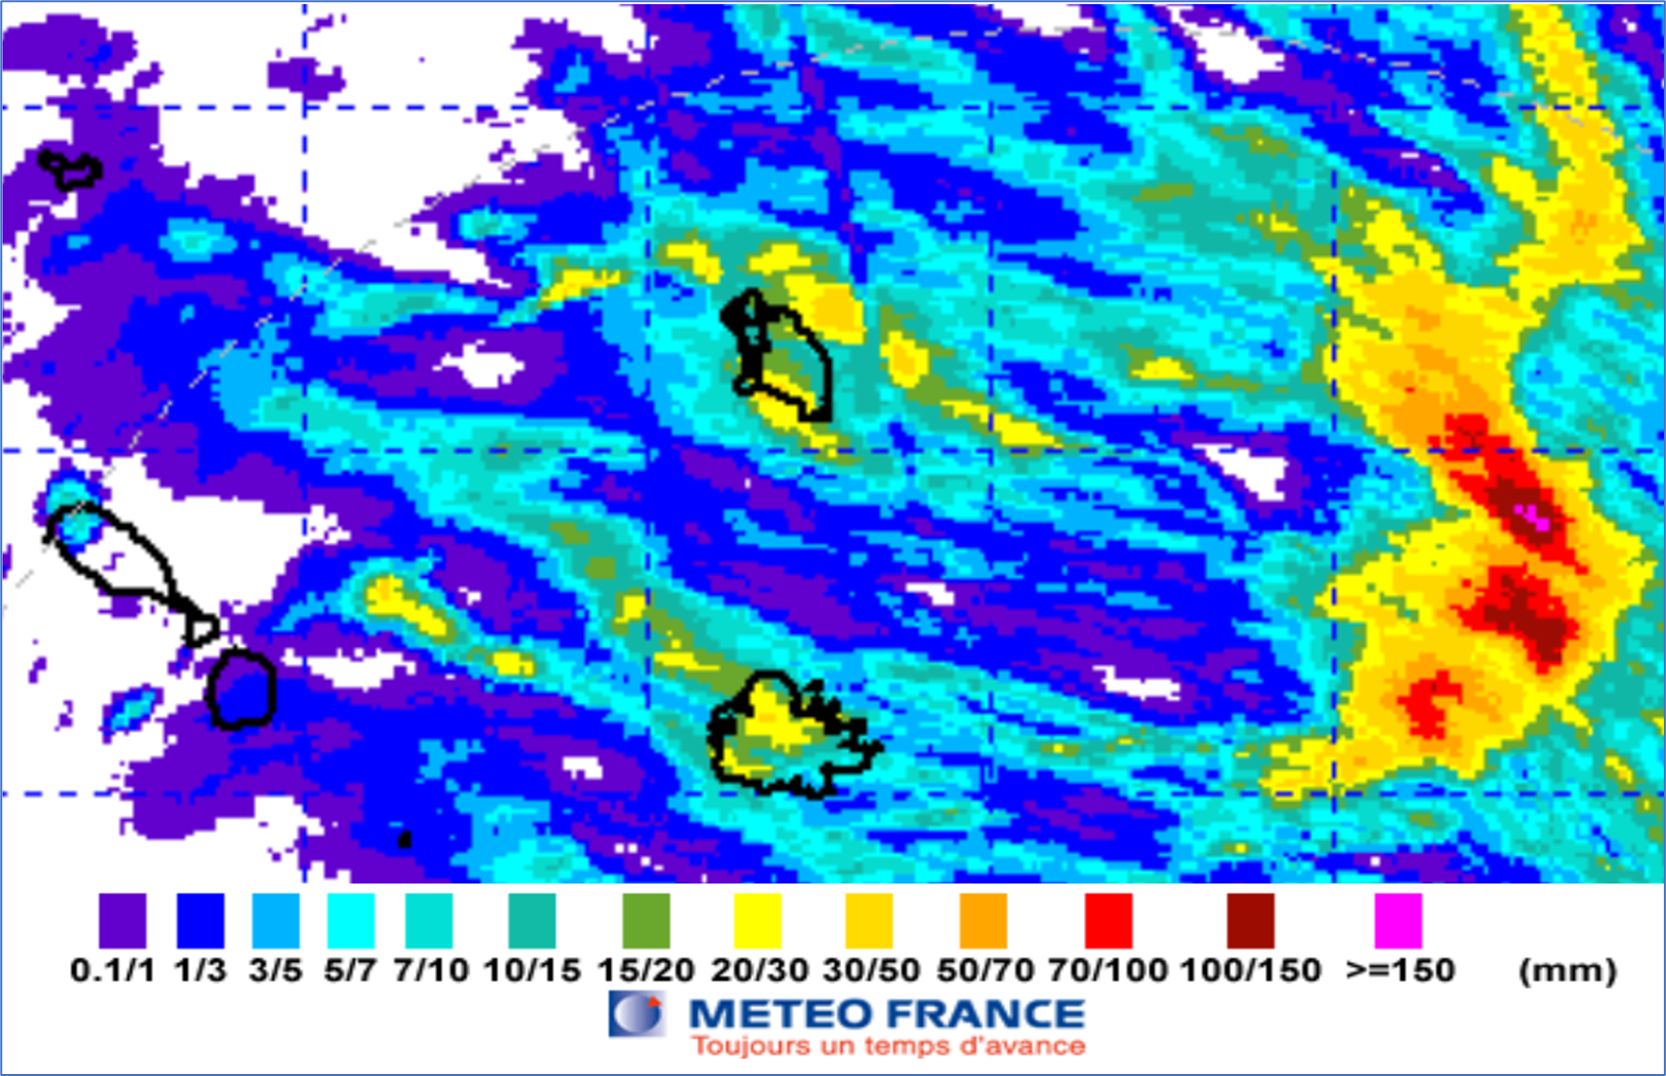 More than 13 mm of rain recorded in some areas over past 24 hours